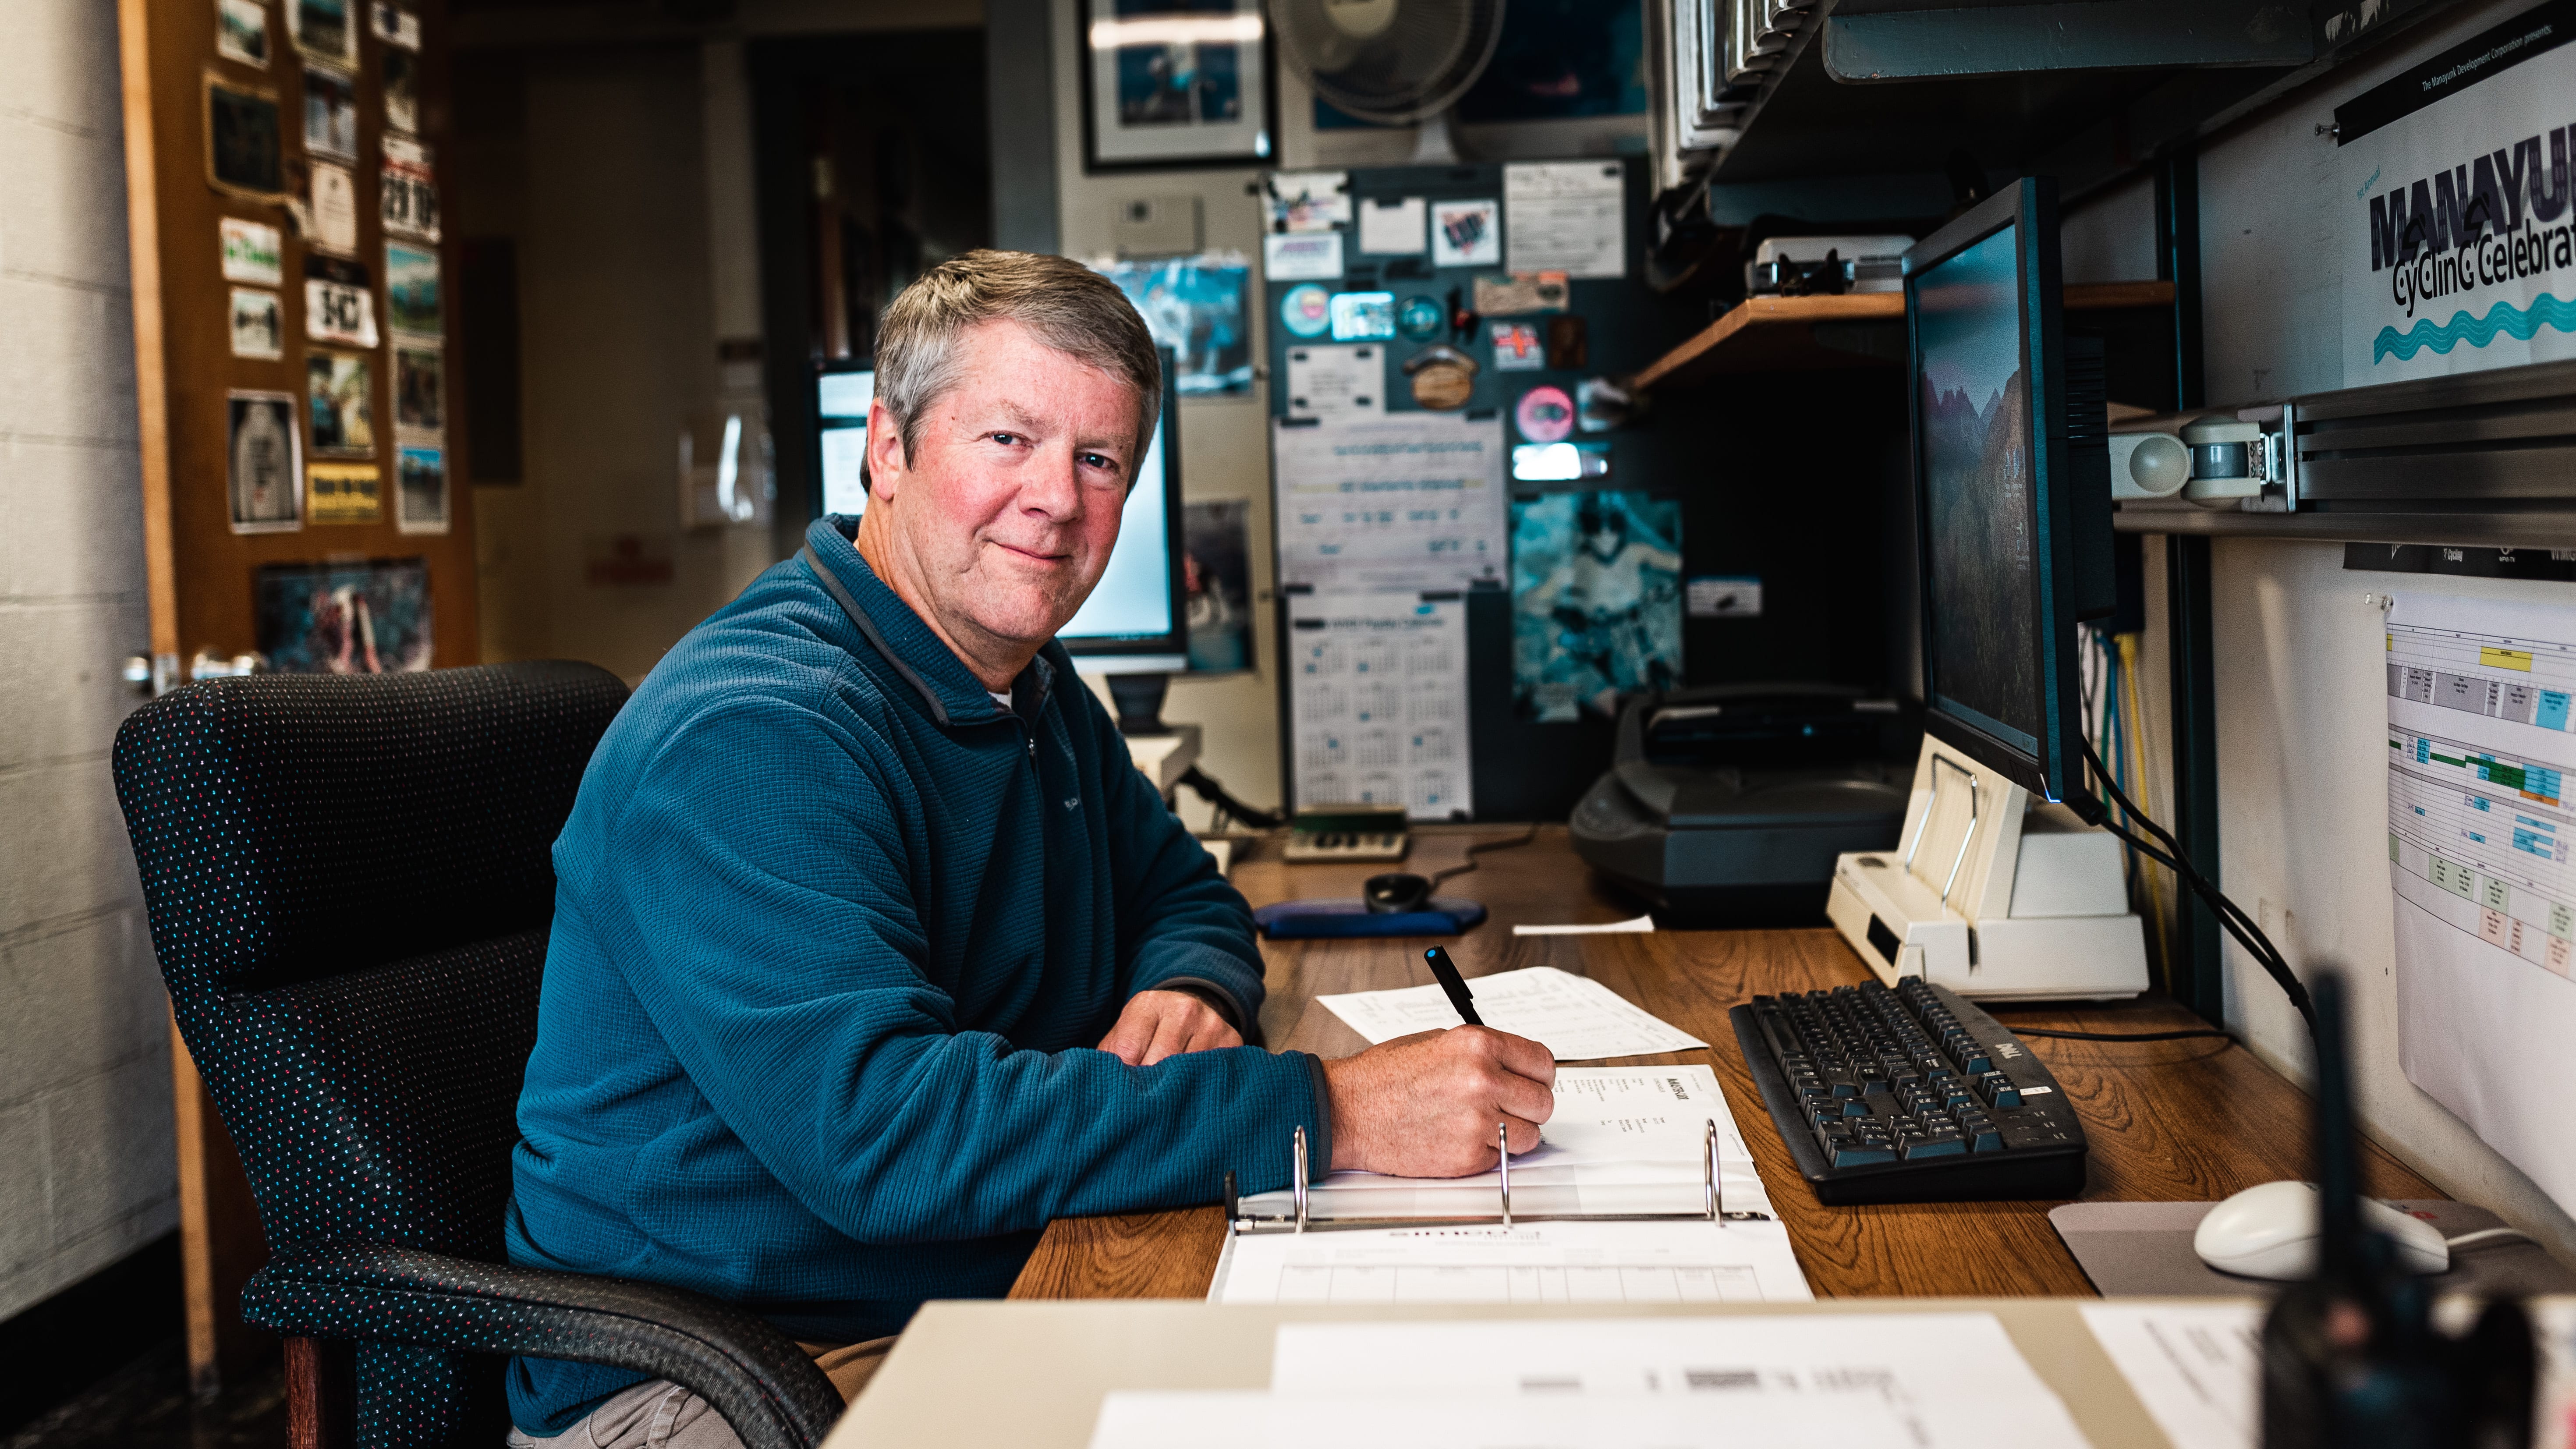 Rick Chandler, one of WHOI's longest-serving employees, oversees support for the Alvin Group. (Photo by Daniel Hentz, Woods Hole Oceanographic Institution)